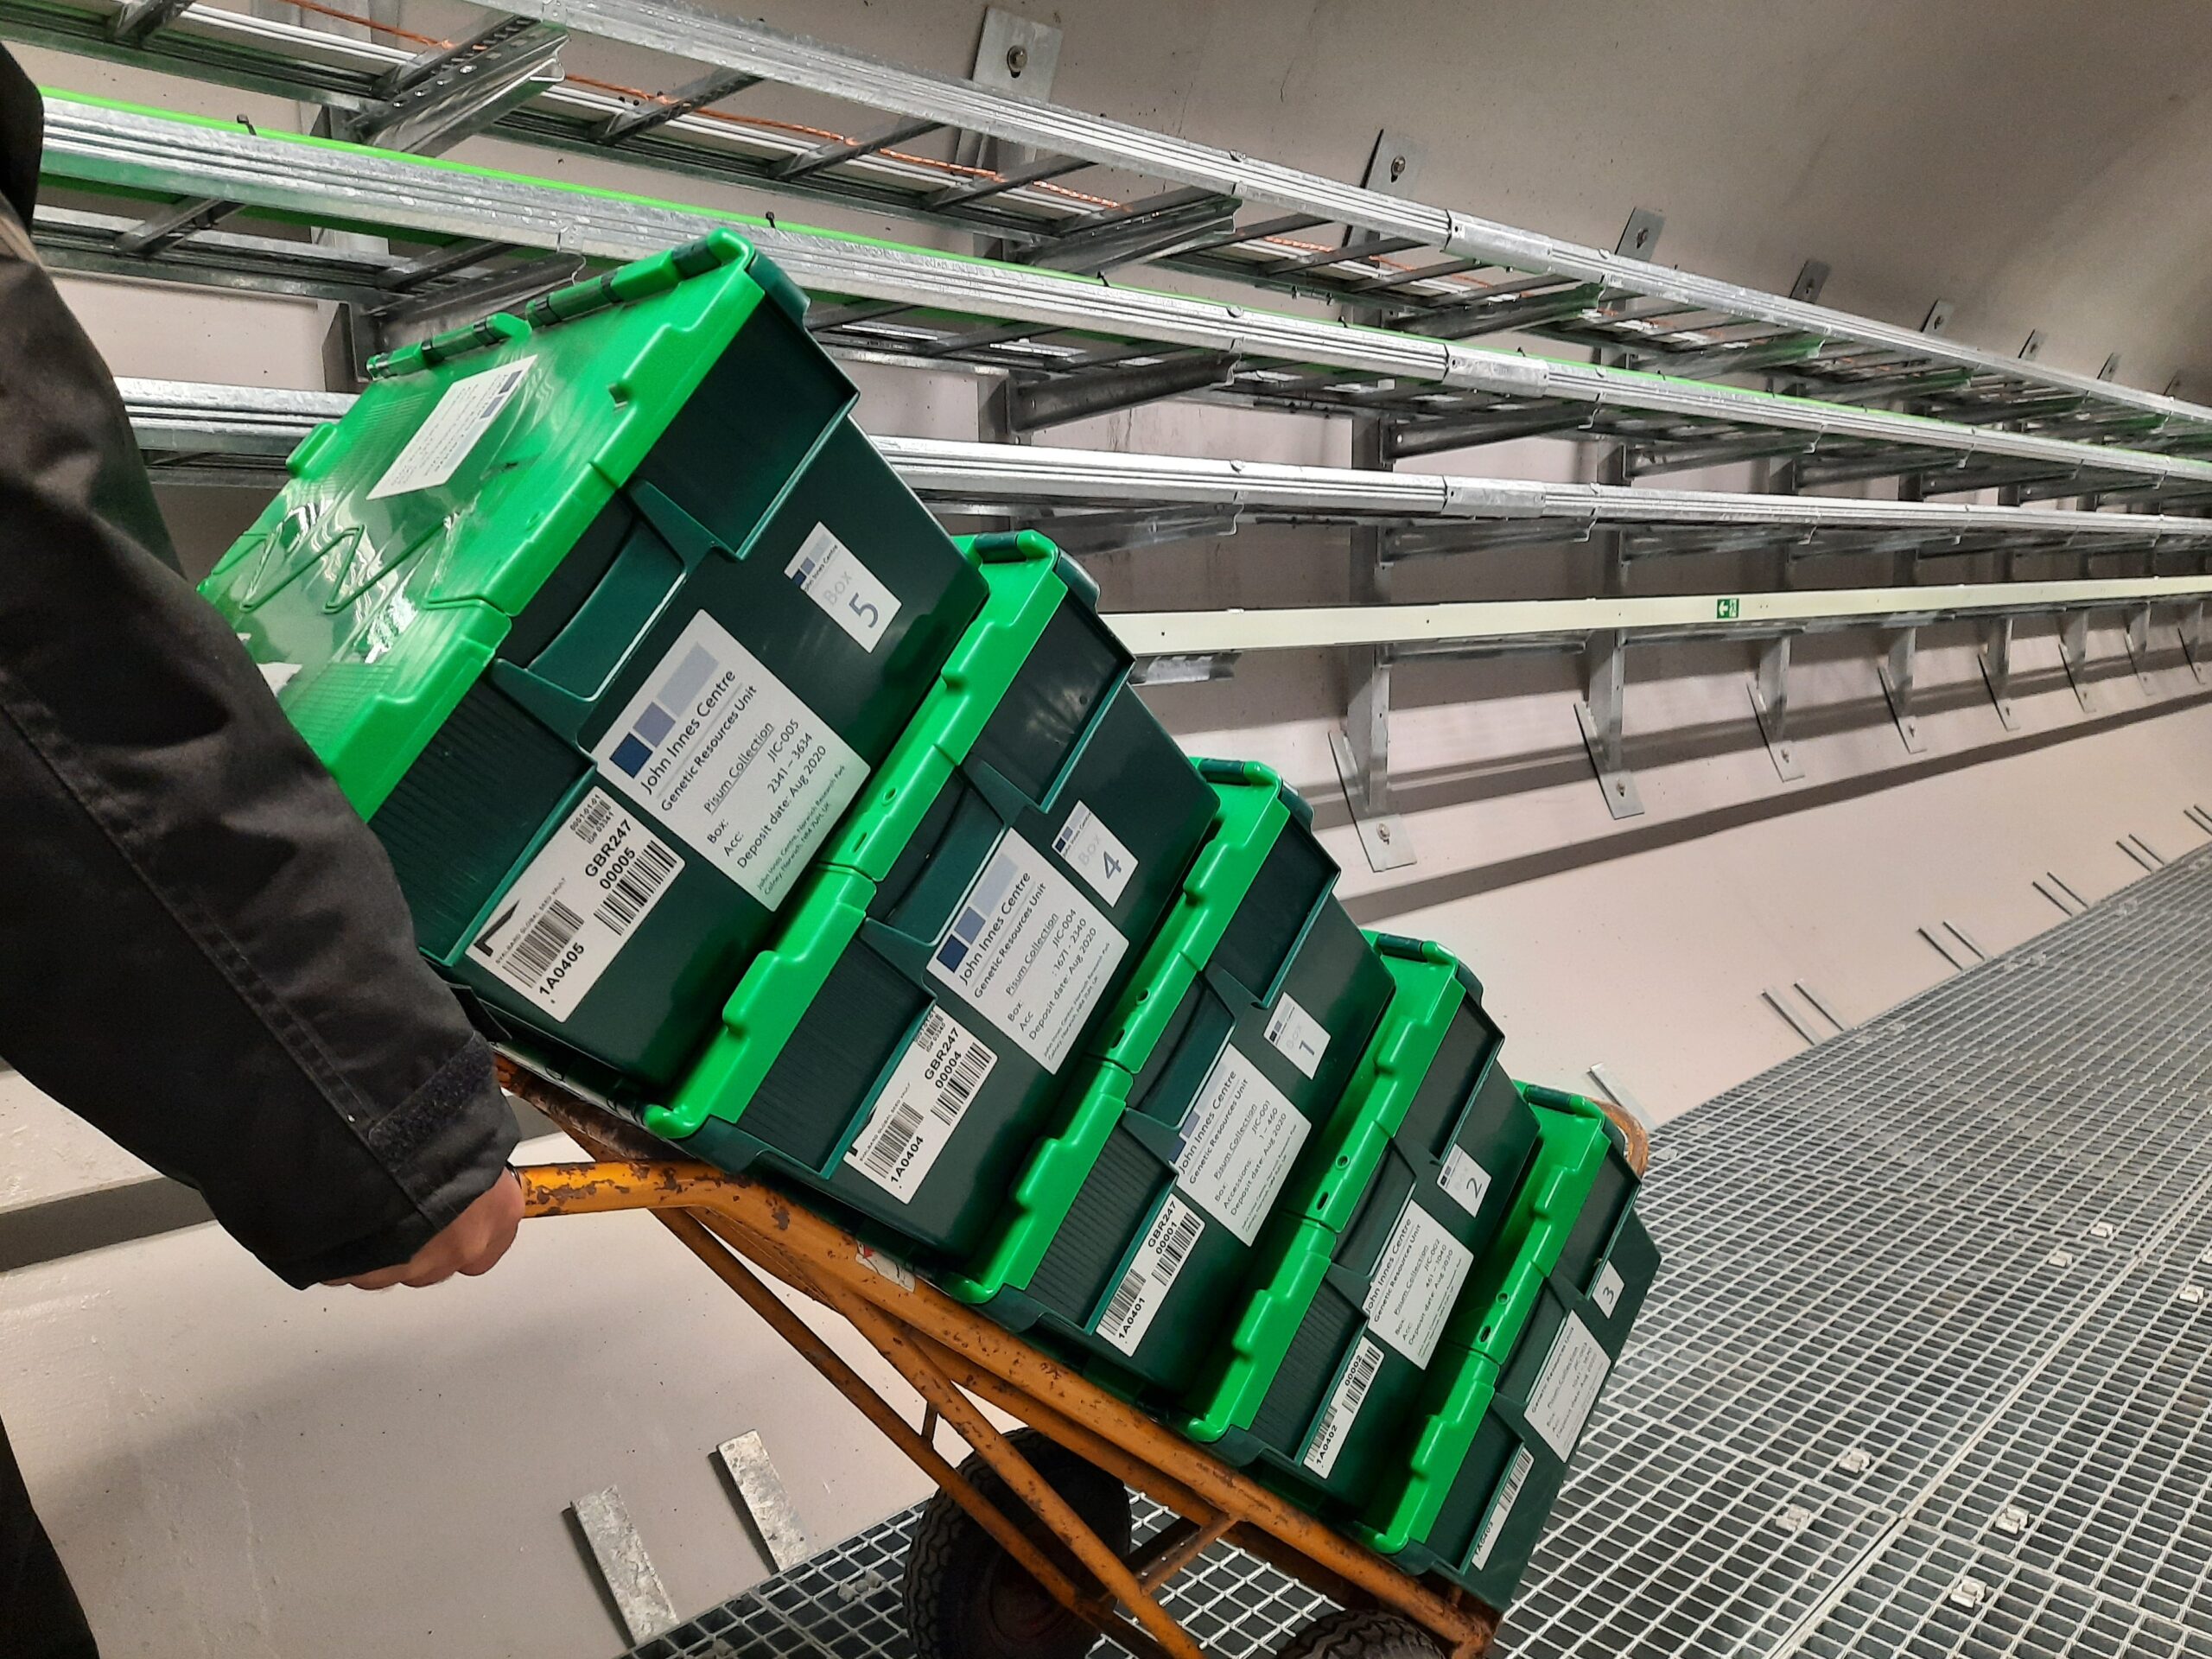 Nearly 3,000 pea samples from UK deposited in the Seed Vault